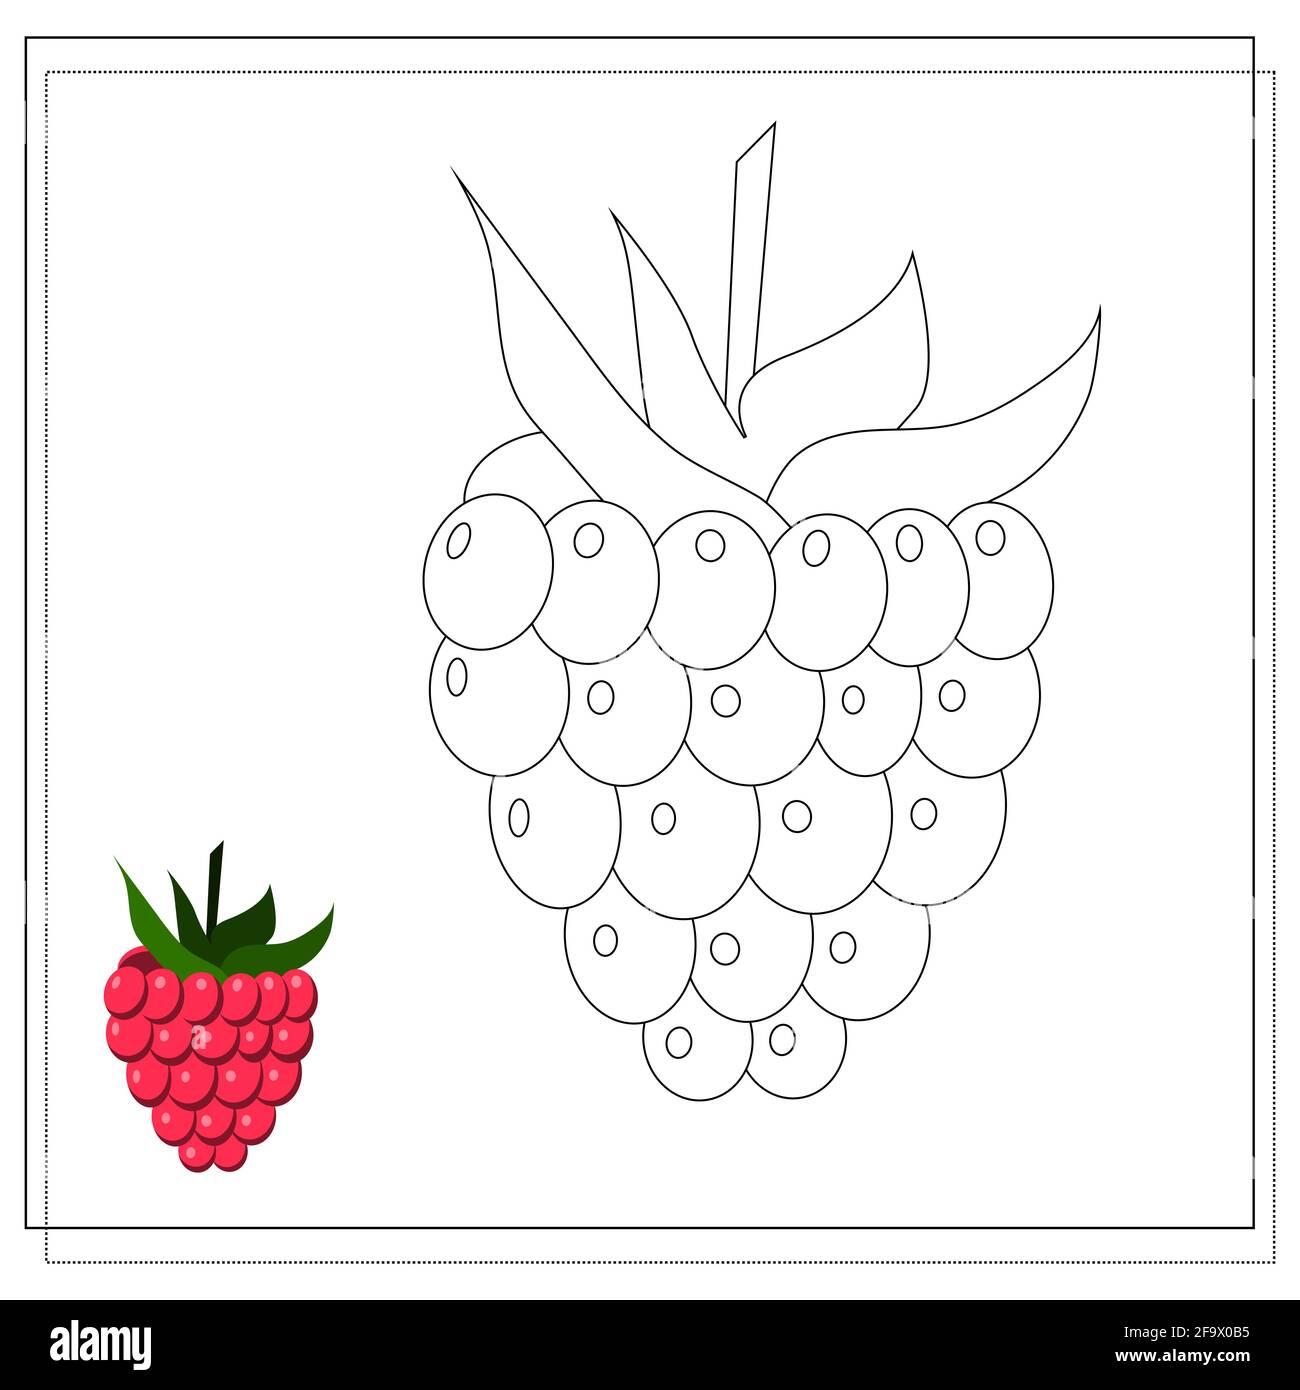 Page of the coloring book raspberry color version and sketch coloring book for kids vector illustration isolated on a white background stock vector image art